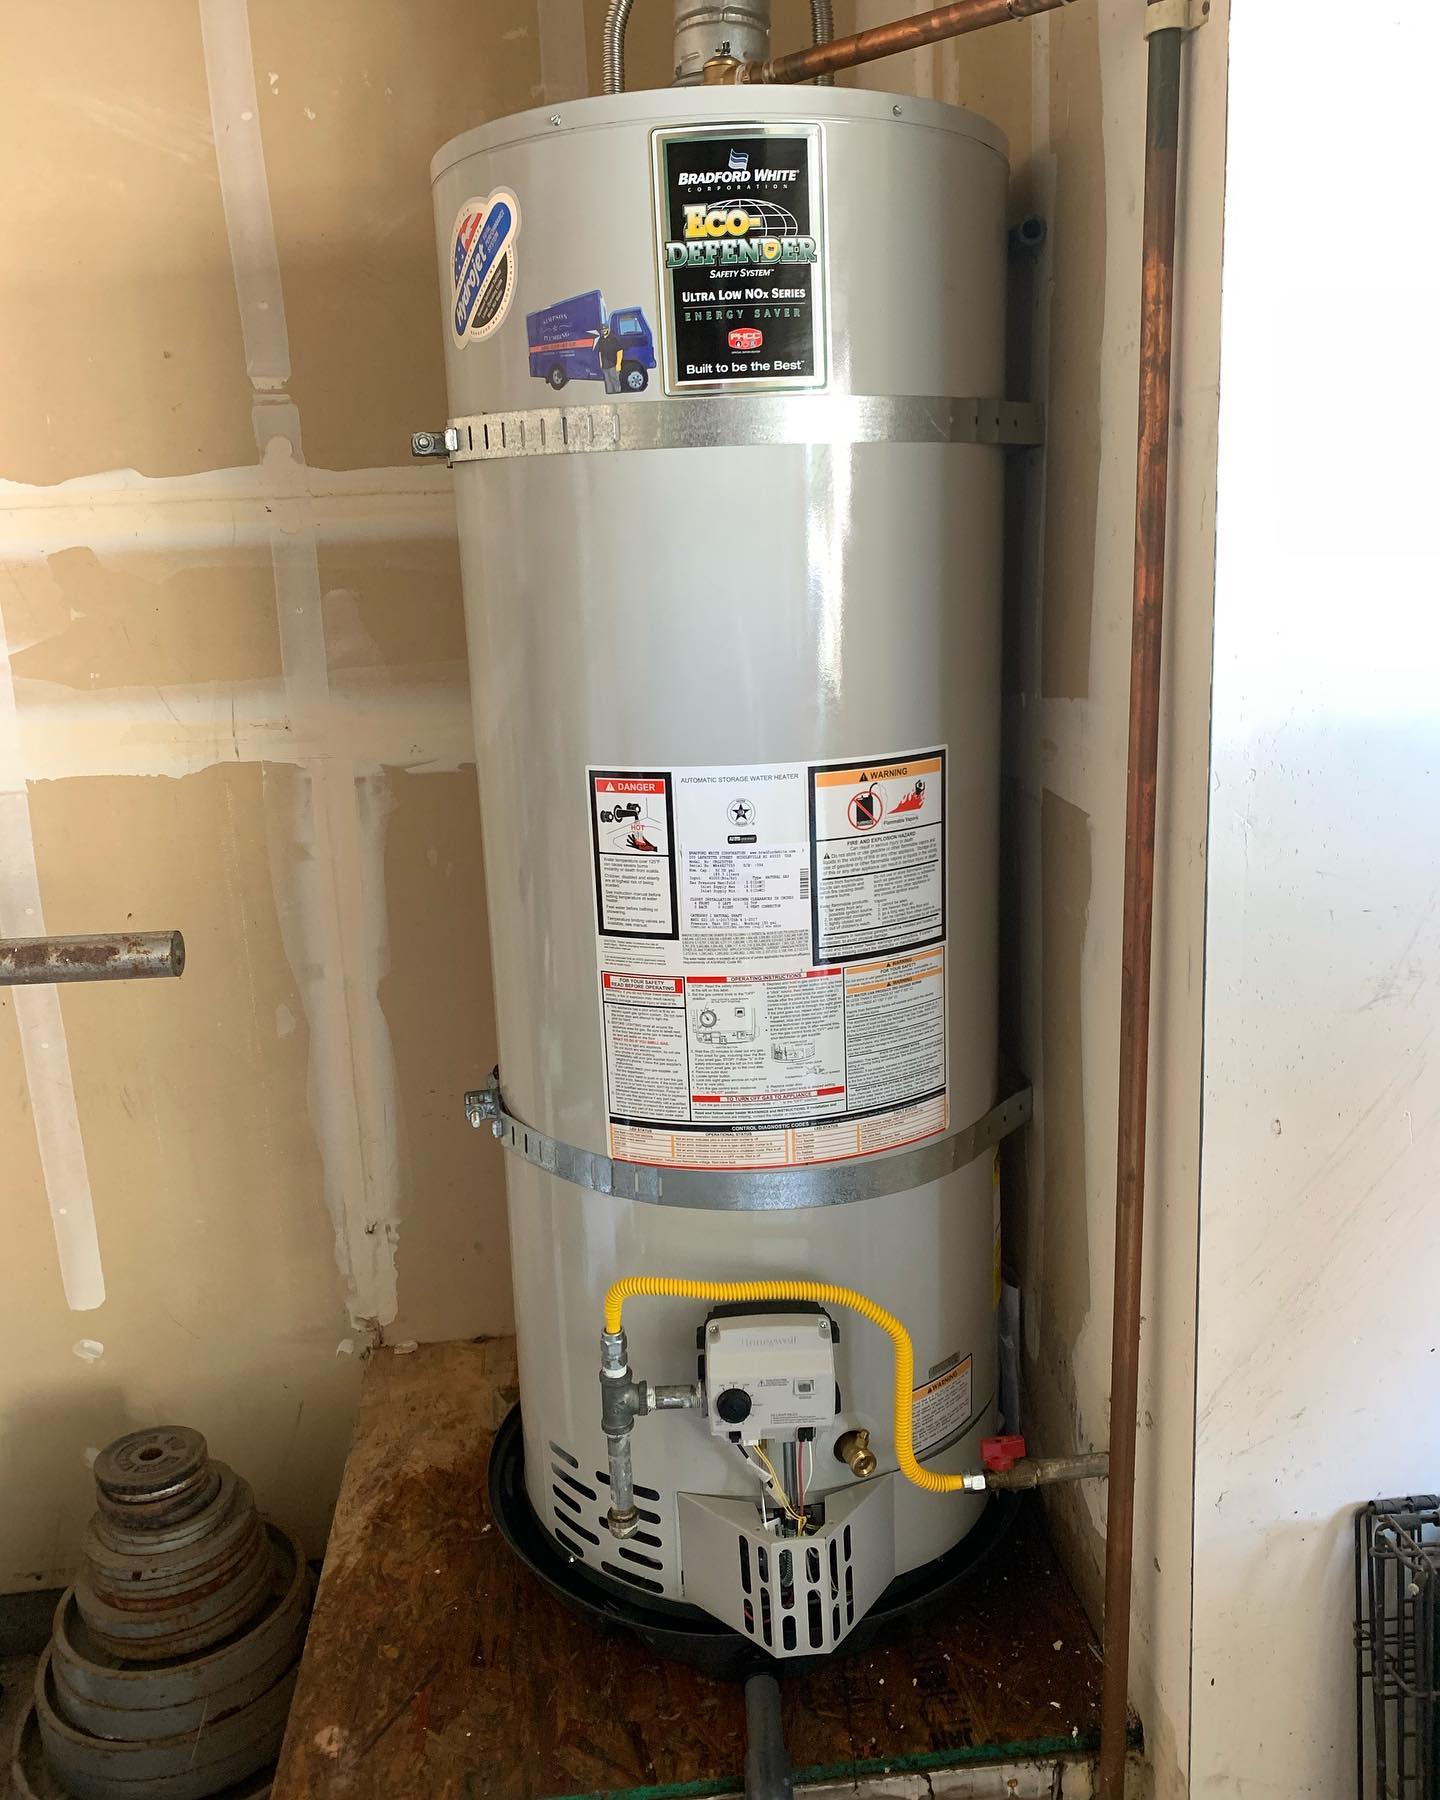 bradford white eco defender tanked water heater installed in a Mountain House garage